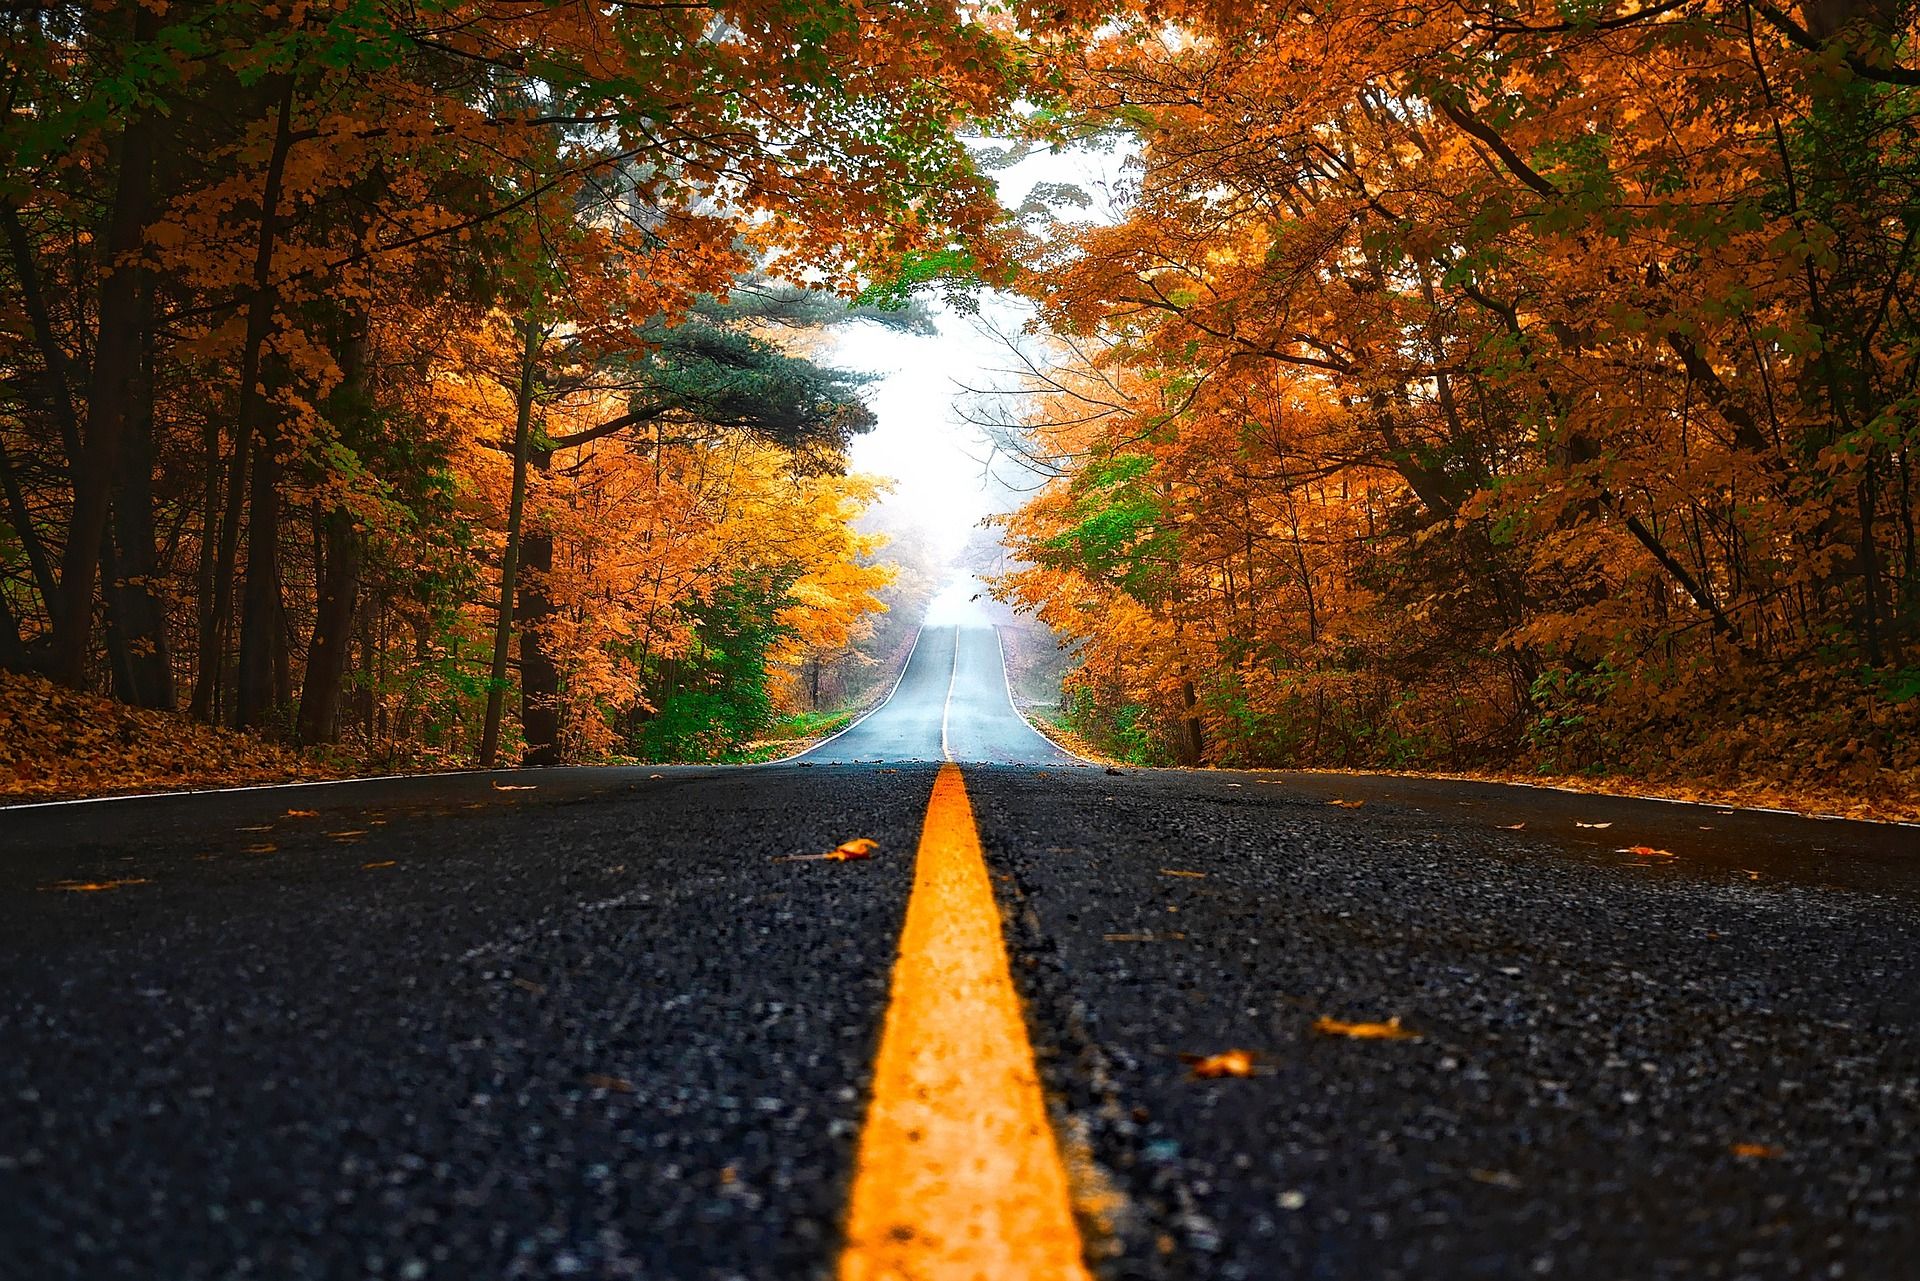 Road surrounded by foliage